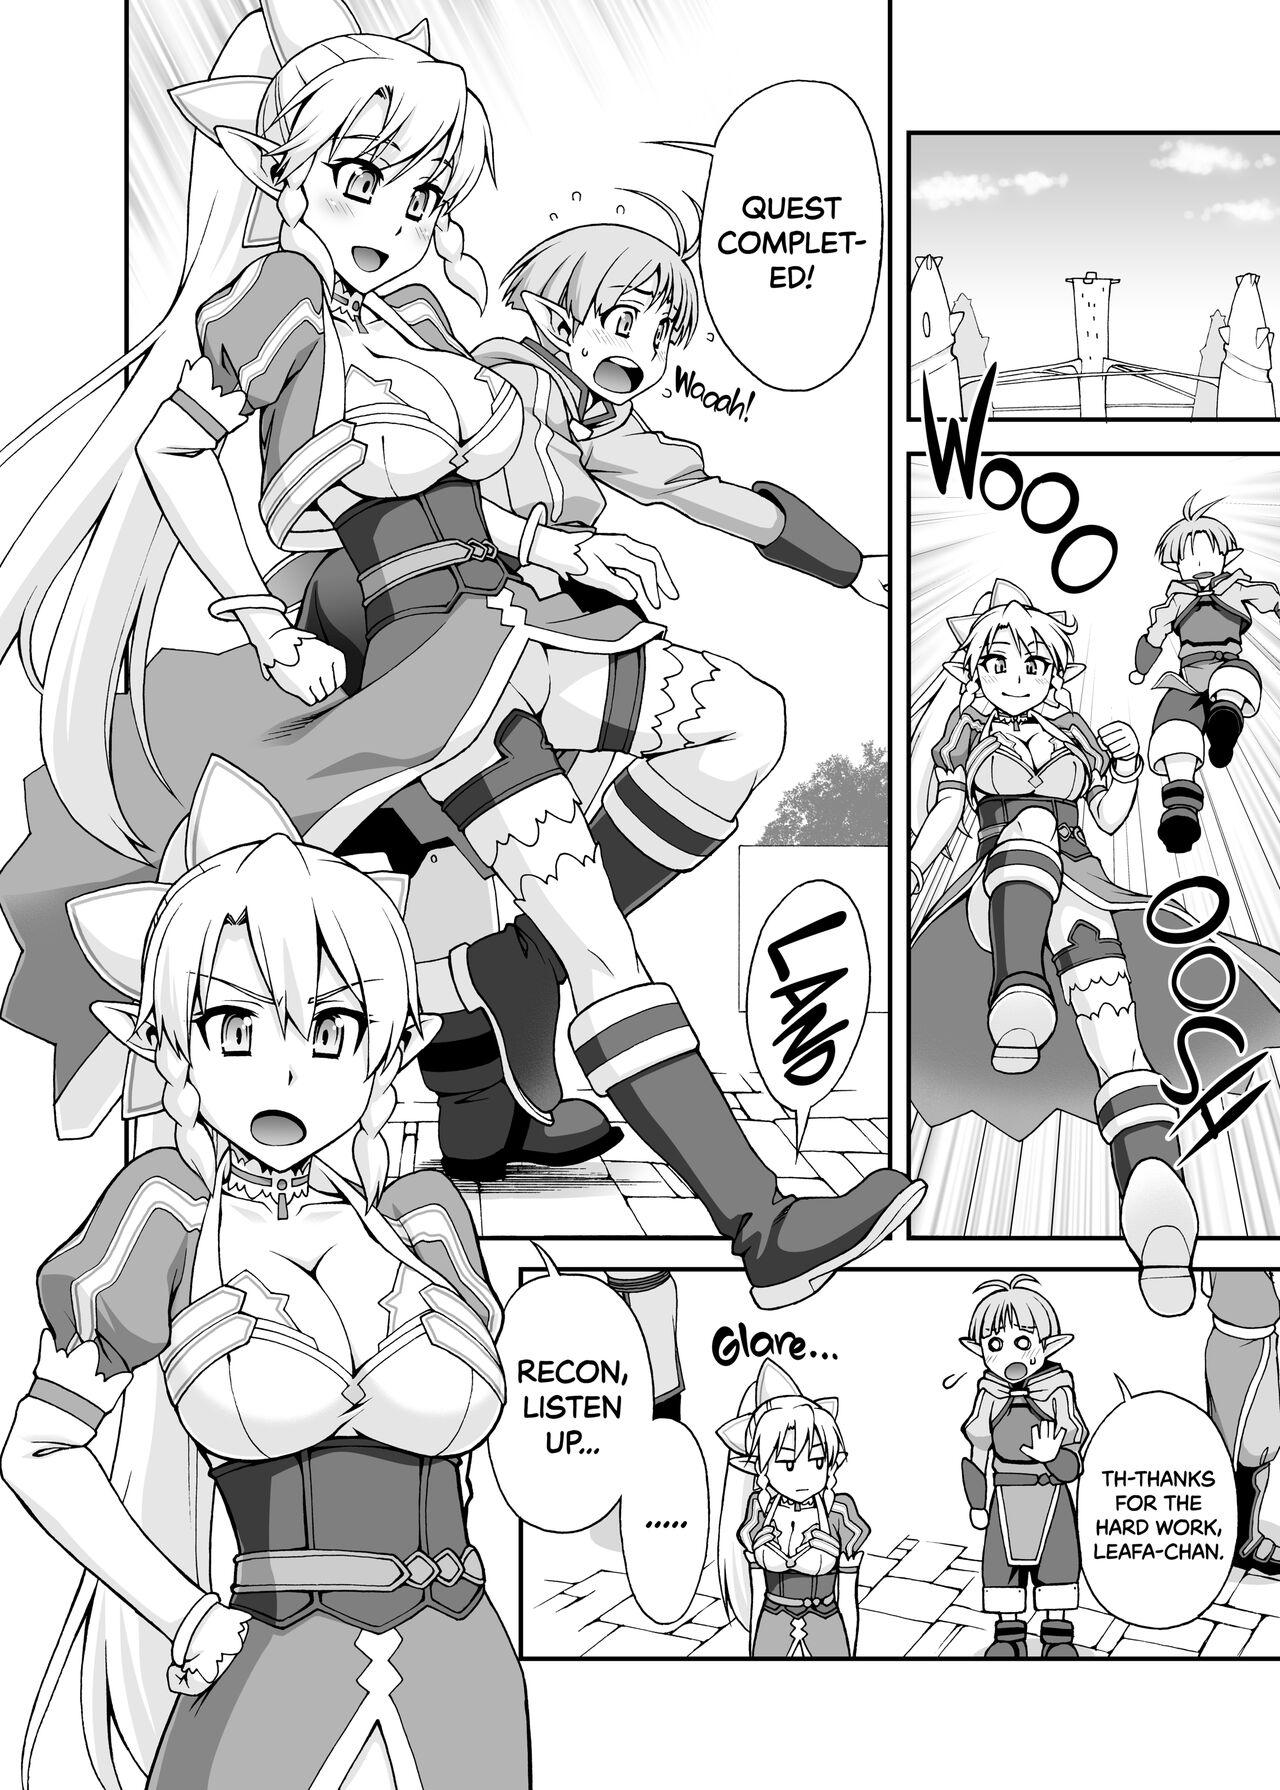 Throatfuck Delphinium Madonna 2 - Sword art online Family Roleplay - Page 3